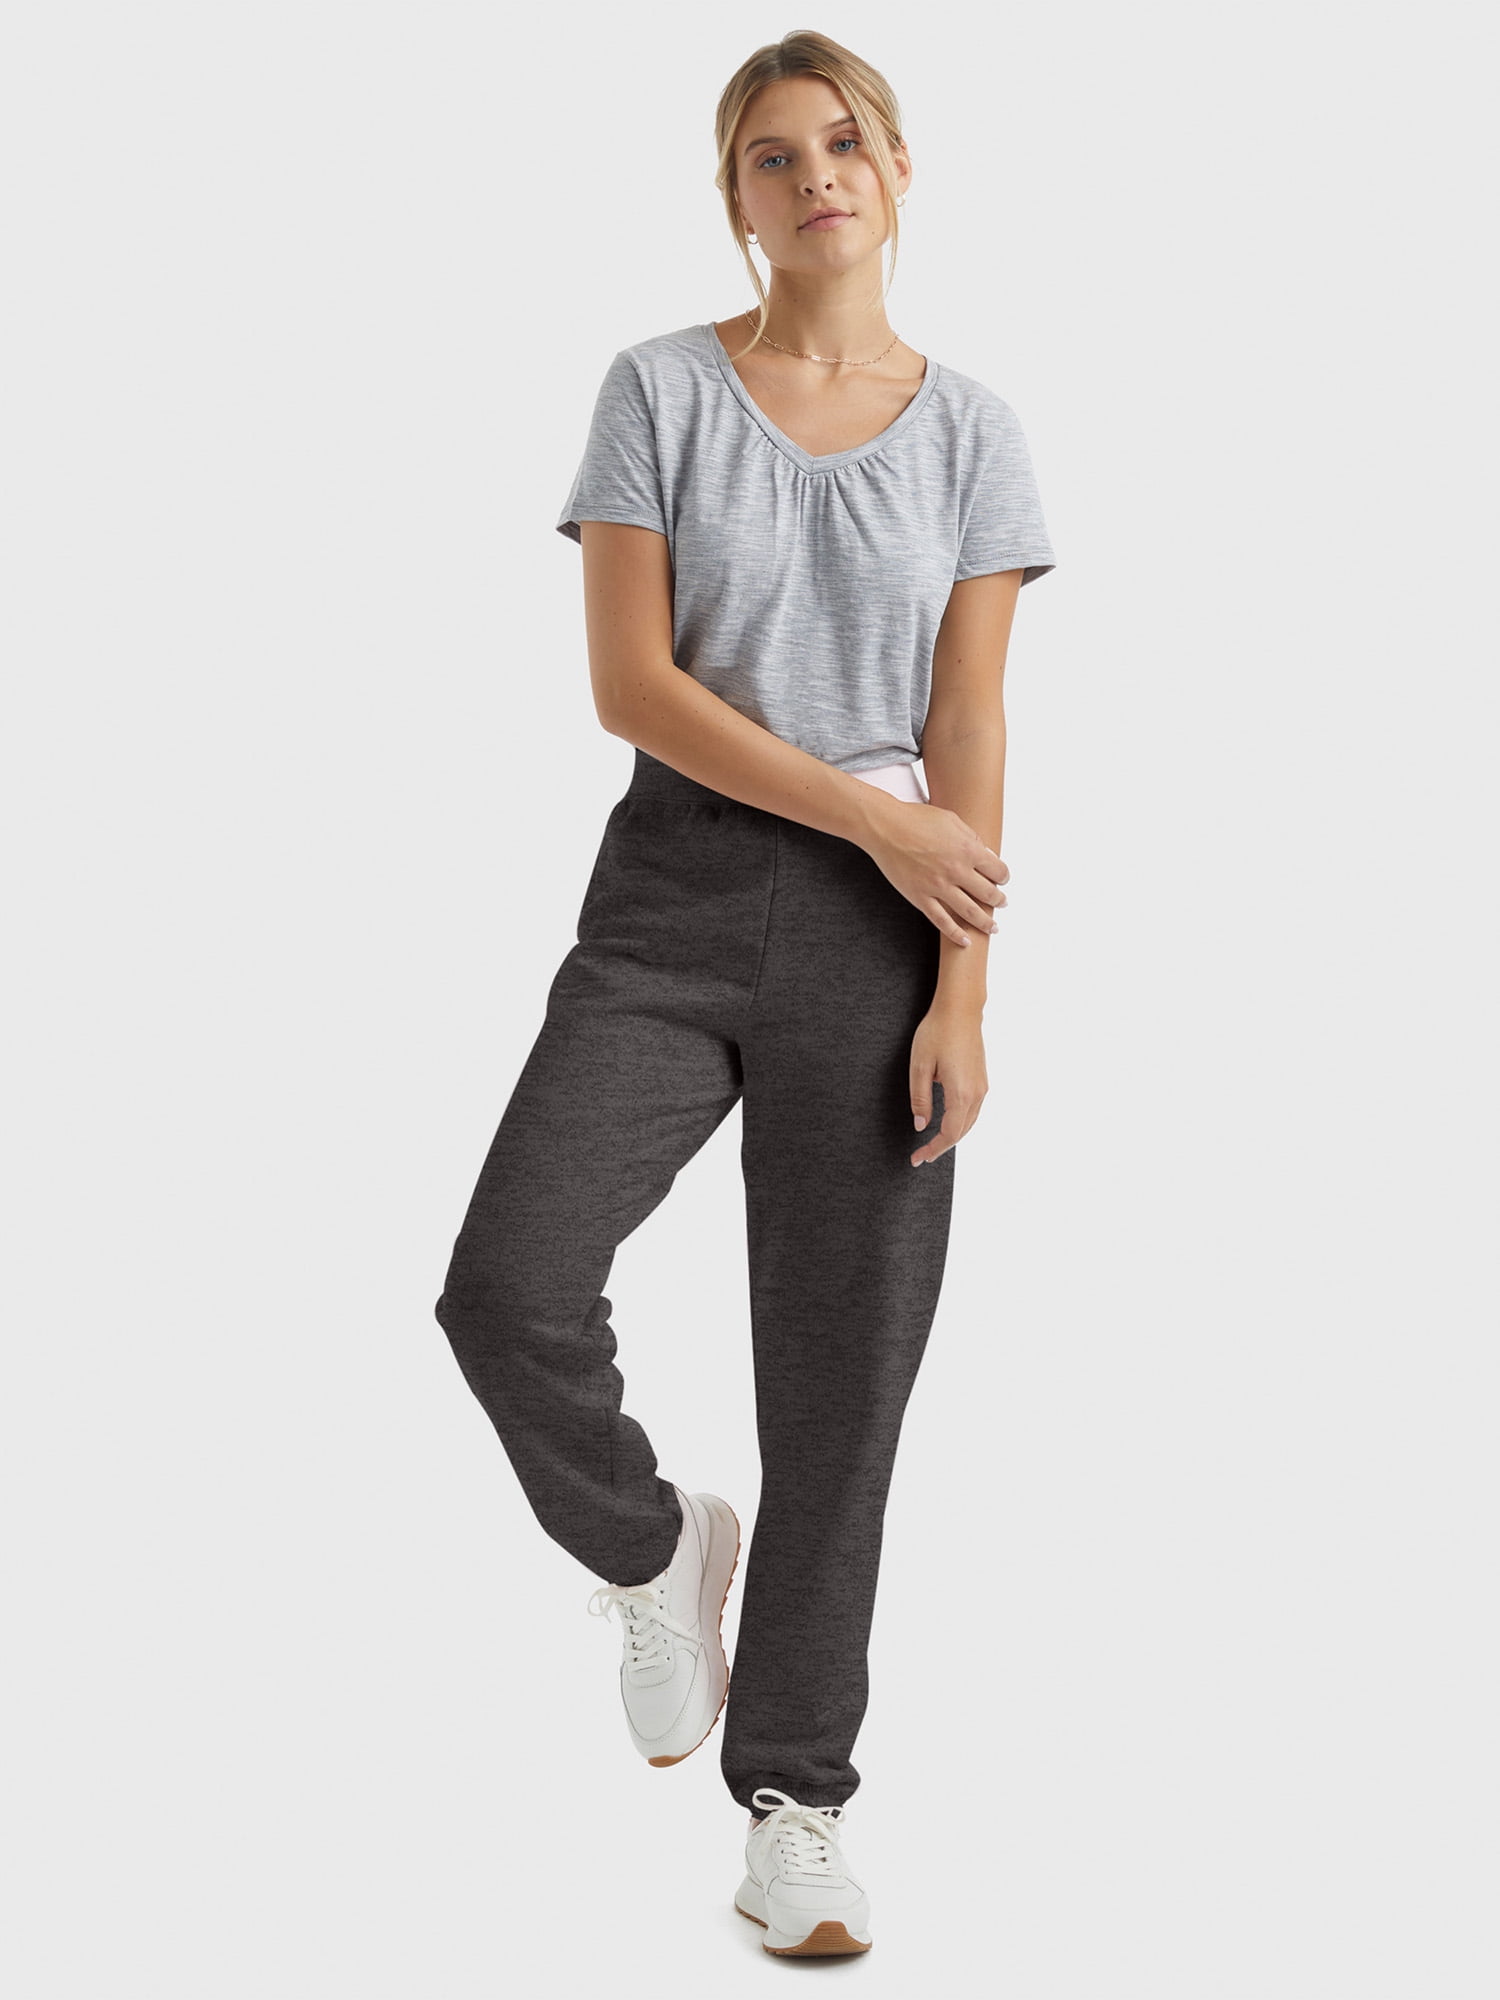 Women's/ Sweatpants by Hanes Size XXL Gray in Color RN 15763